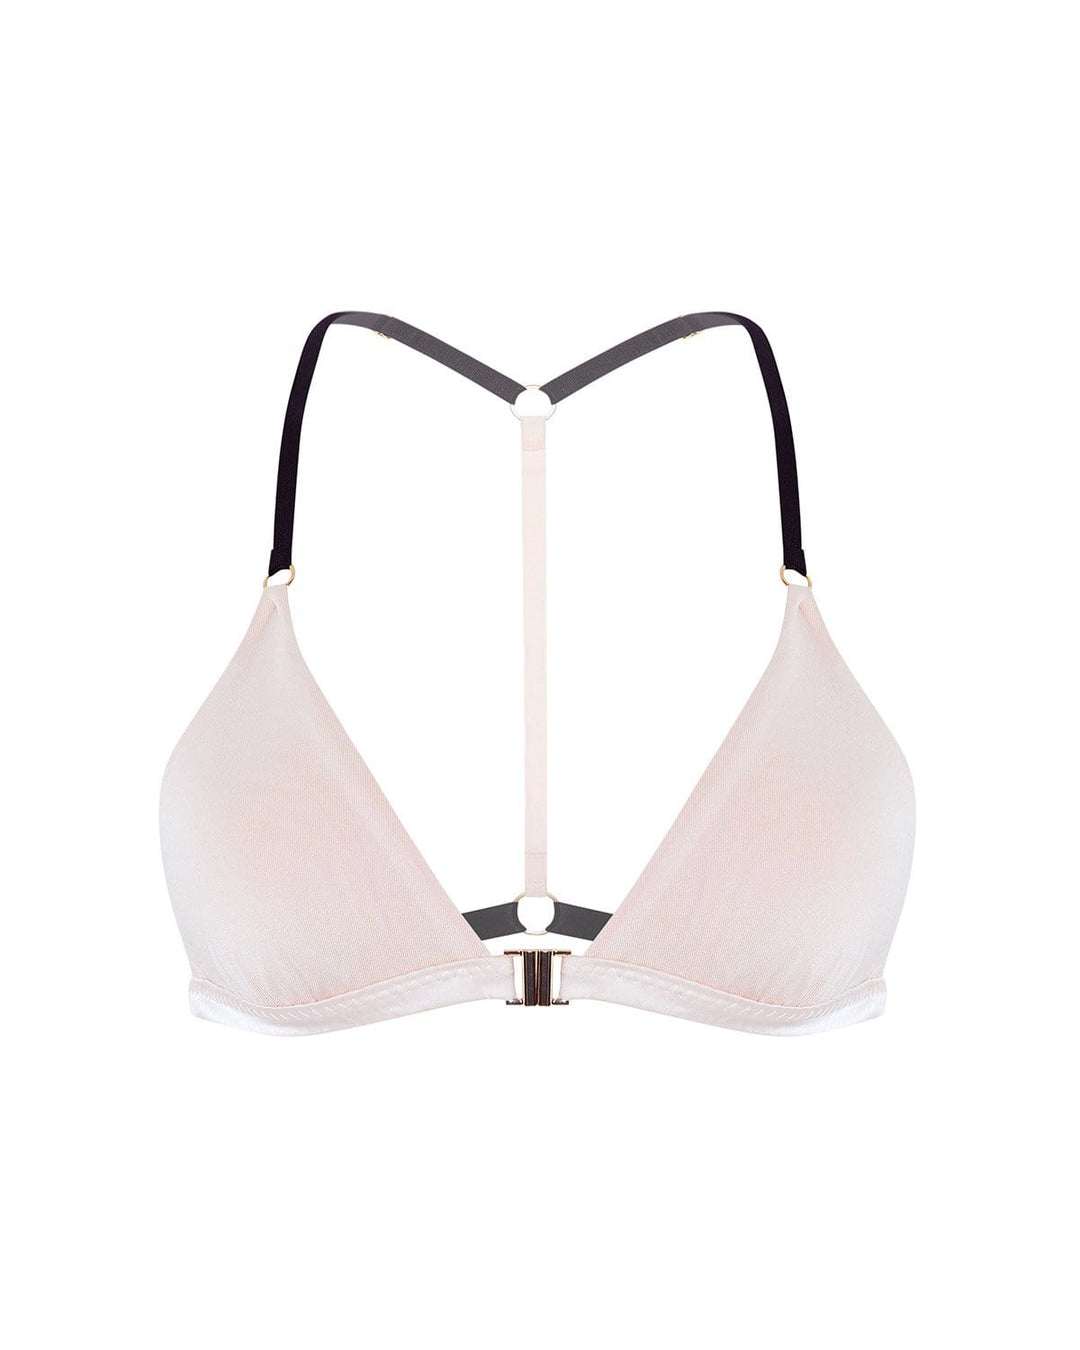 Vivi Leigh London lingerie Blush Pink Silk Jersey Triangle Bralette sexy harness luxury lingerie uk sustainable brand